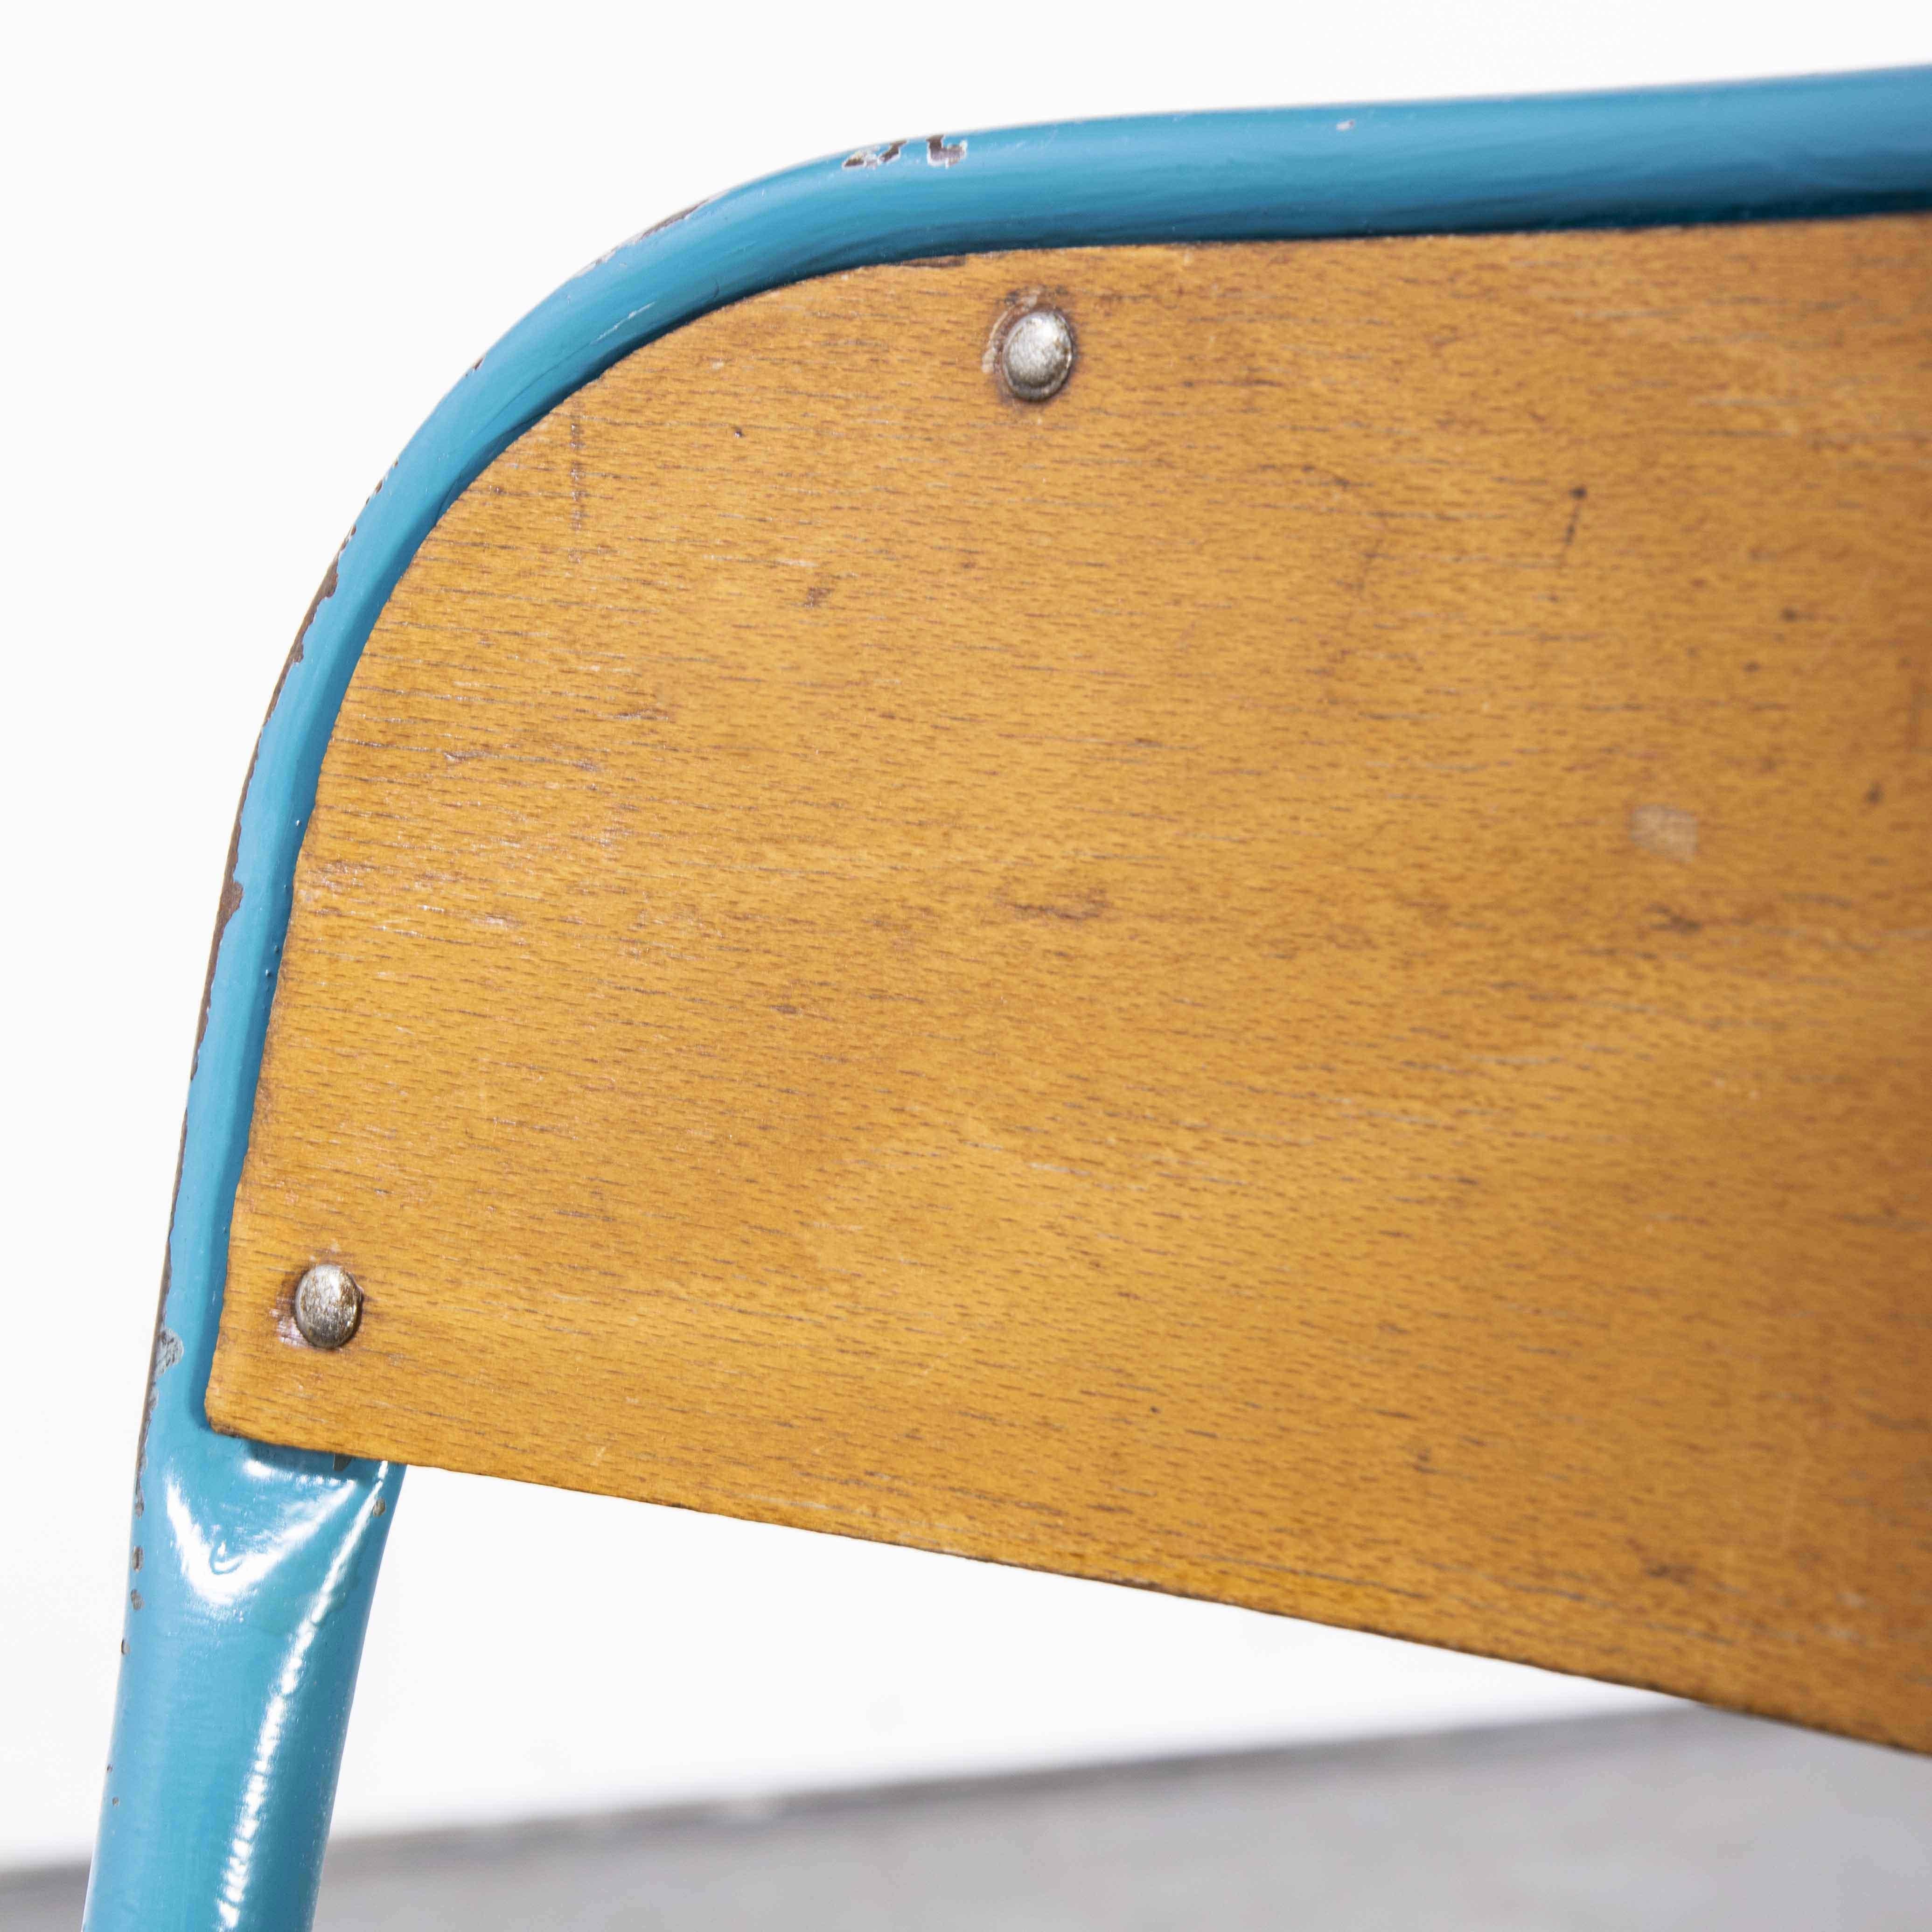 1970’s French Mullca stacking chair – light blue 3 – various quantities available
1970’s French Mullca stacking chair – light blue 3 – various quantities available. One of our most favourite chairs, in 1947 Robert Muller and Gaston Cavaillon